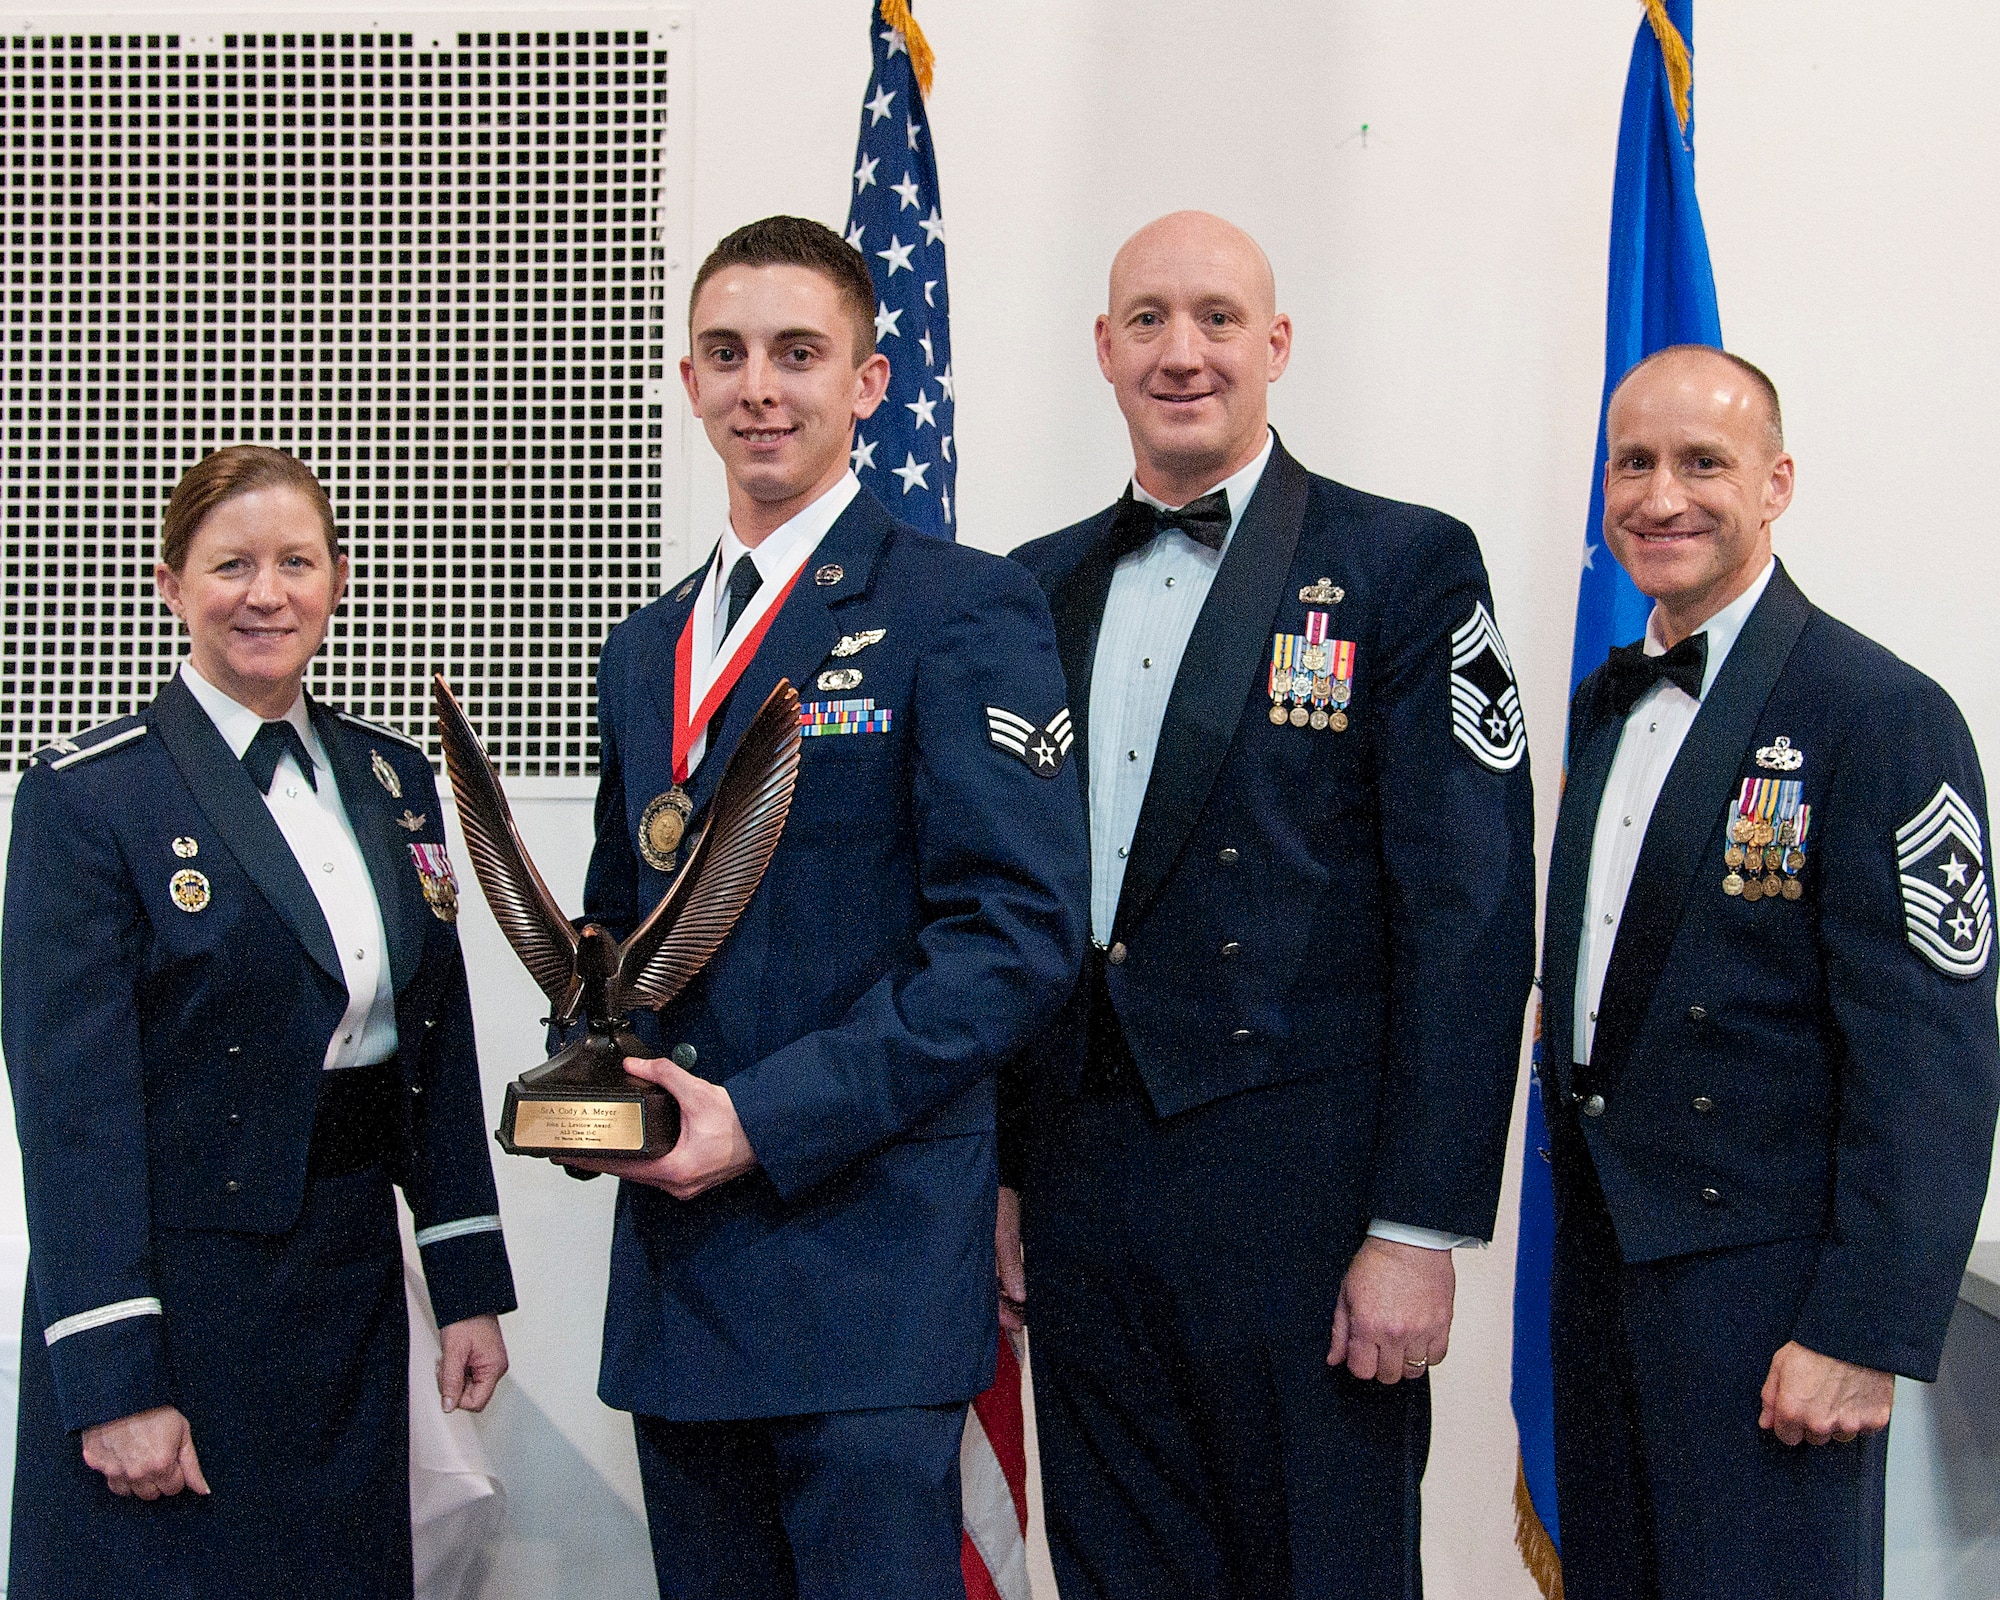 Senior Airman Cody Meyer, 37th Helicopter Squadron special missions aviator, receives the John L. Levitow Award from Col. Tracey Hayes, 90th Missile Wing commander, during the Airman Leadership School graduation Feb. 11, 2015, at F.E. Warren Air Force Base, Wyo. The Levitow Award is the highest achievement for enlisted Airmen enrolled in U.S. Air Force professional military education. There are four levels of PME: ALS, Non-Commissioned Officer Academy, Air Force Senior NCO Academy and Chief Master Sergeant Leadership Course. (U.S. Air Force photo by Senior Airman Jason Wiese)